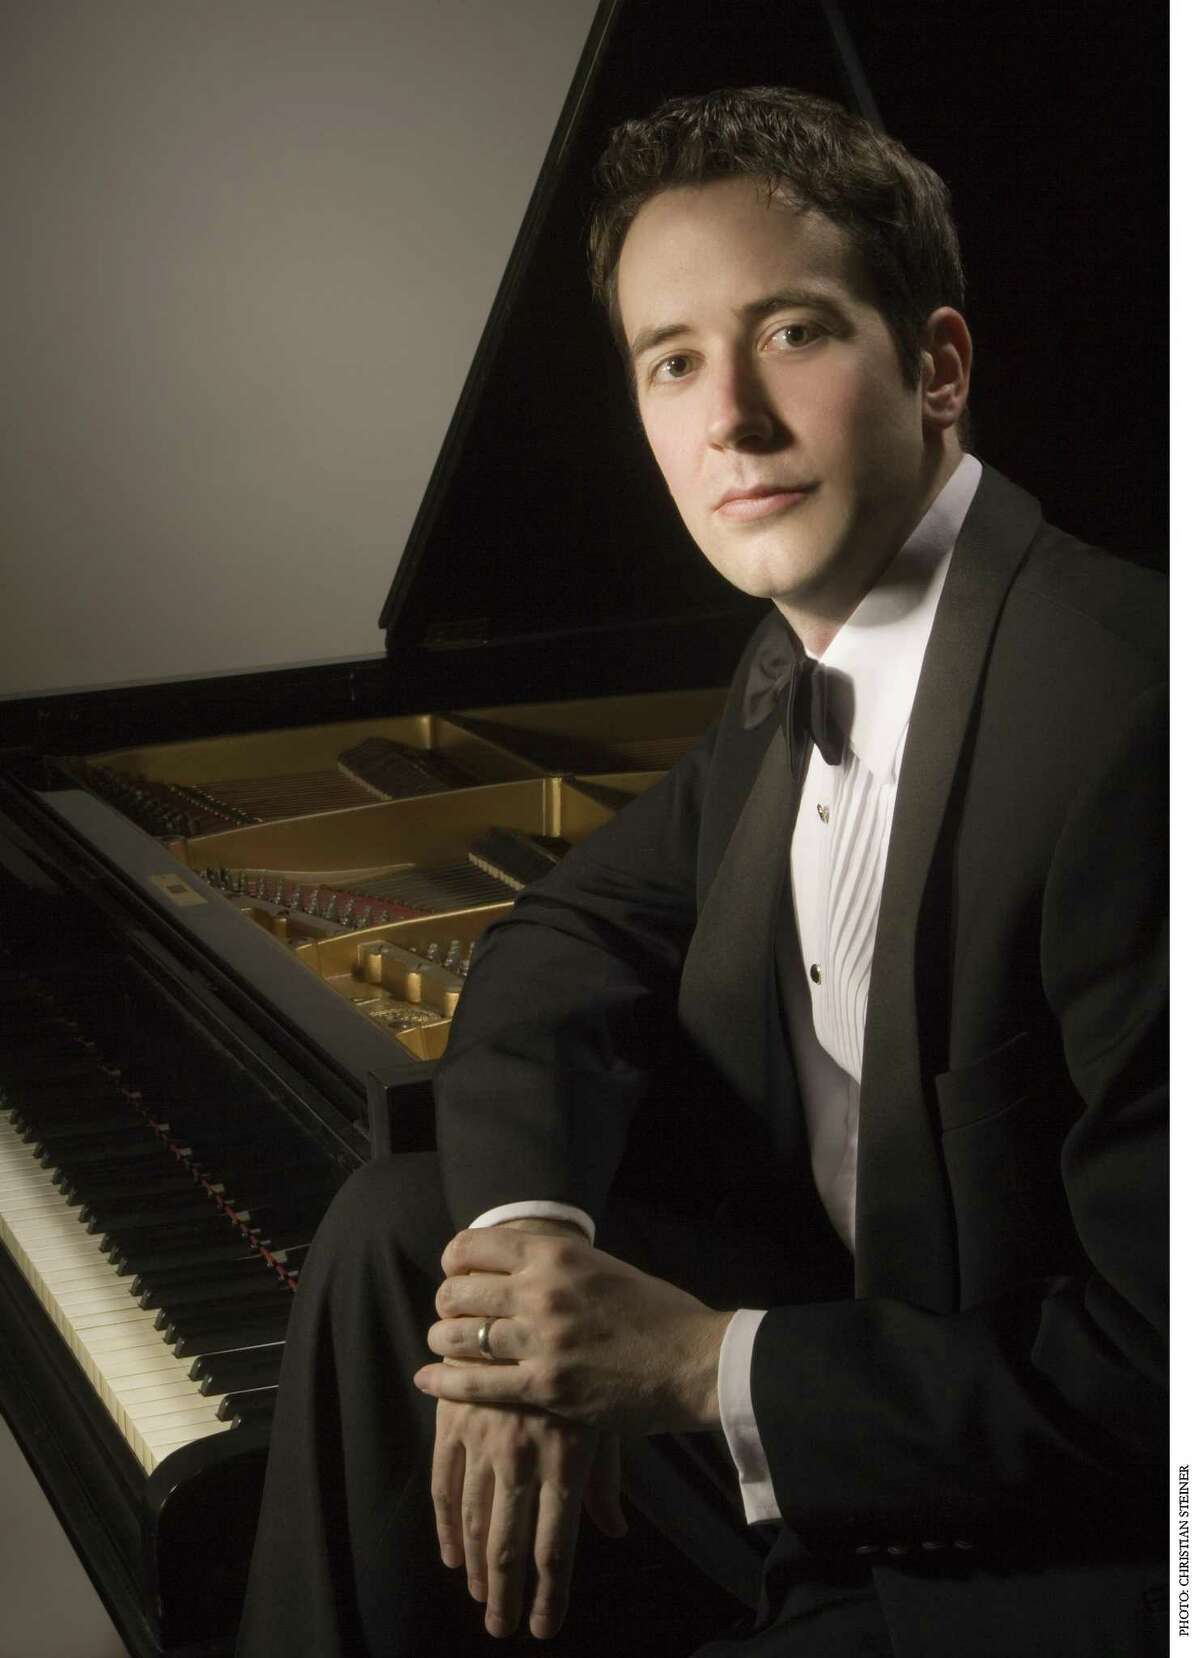 Classical piano player Philip Edward Fisher played the Beethoven’s Piano Concerto No. 1.